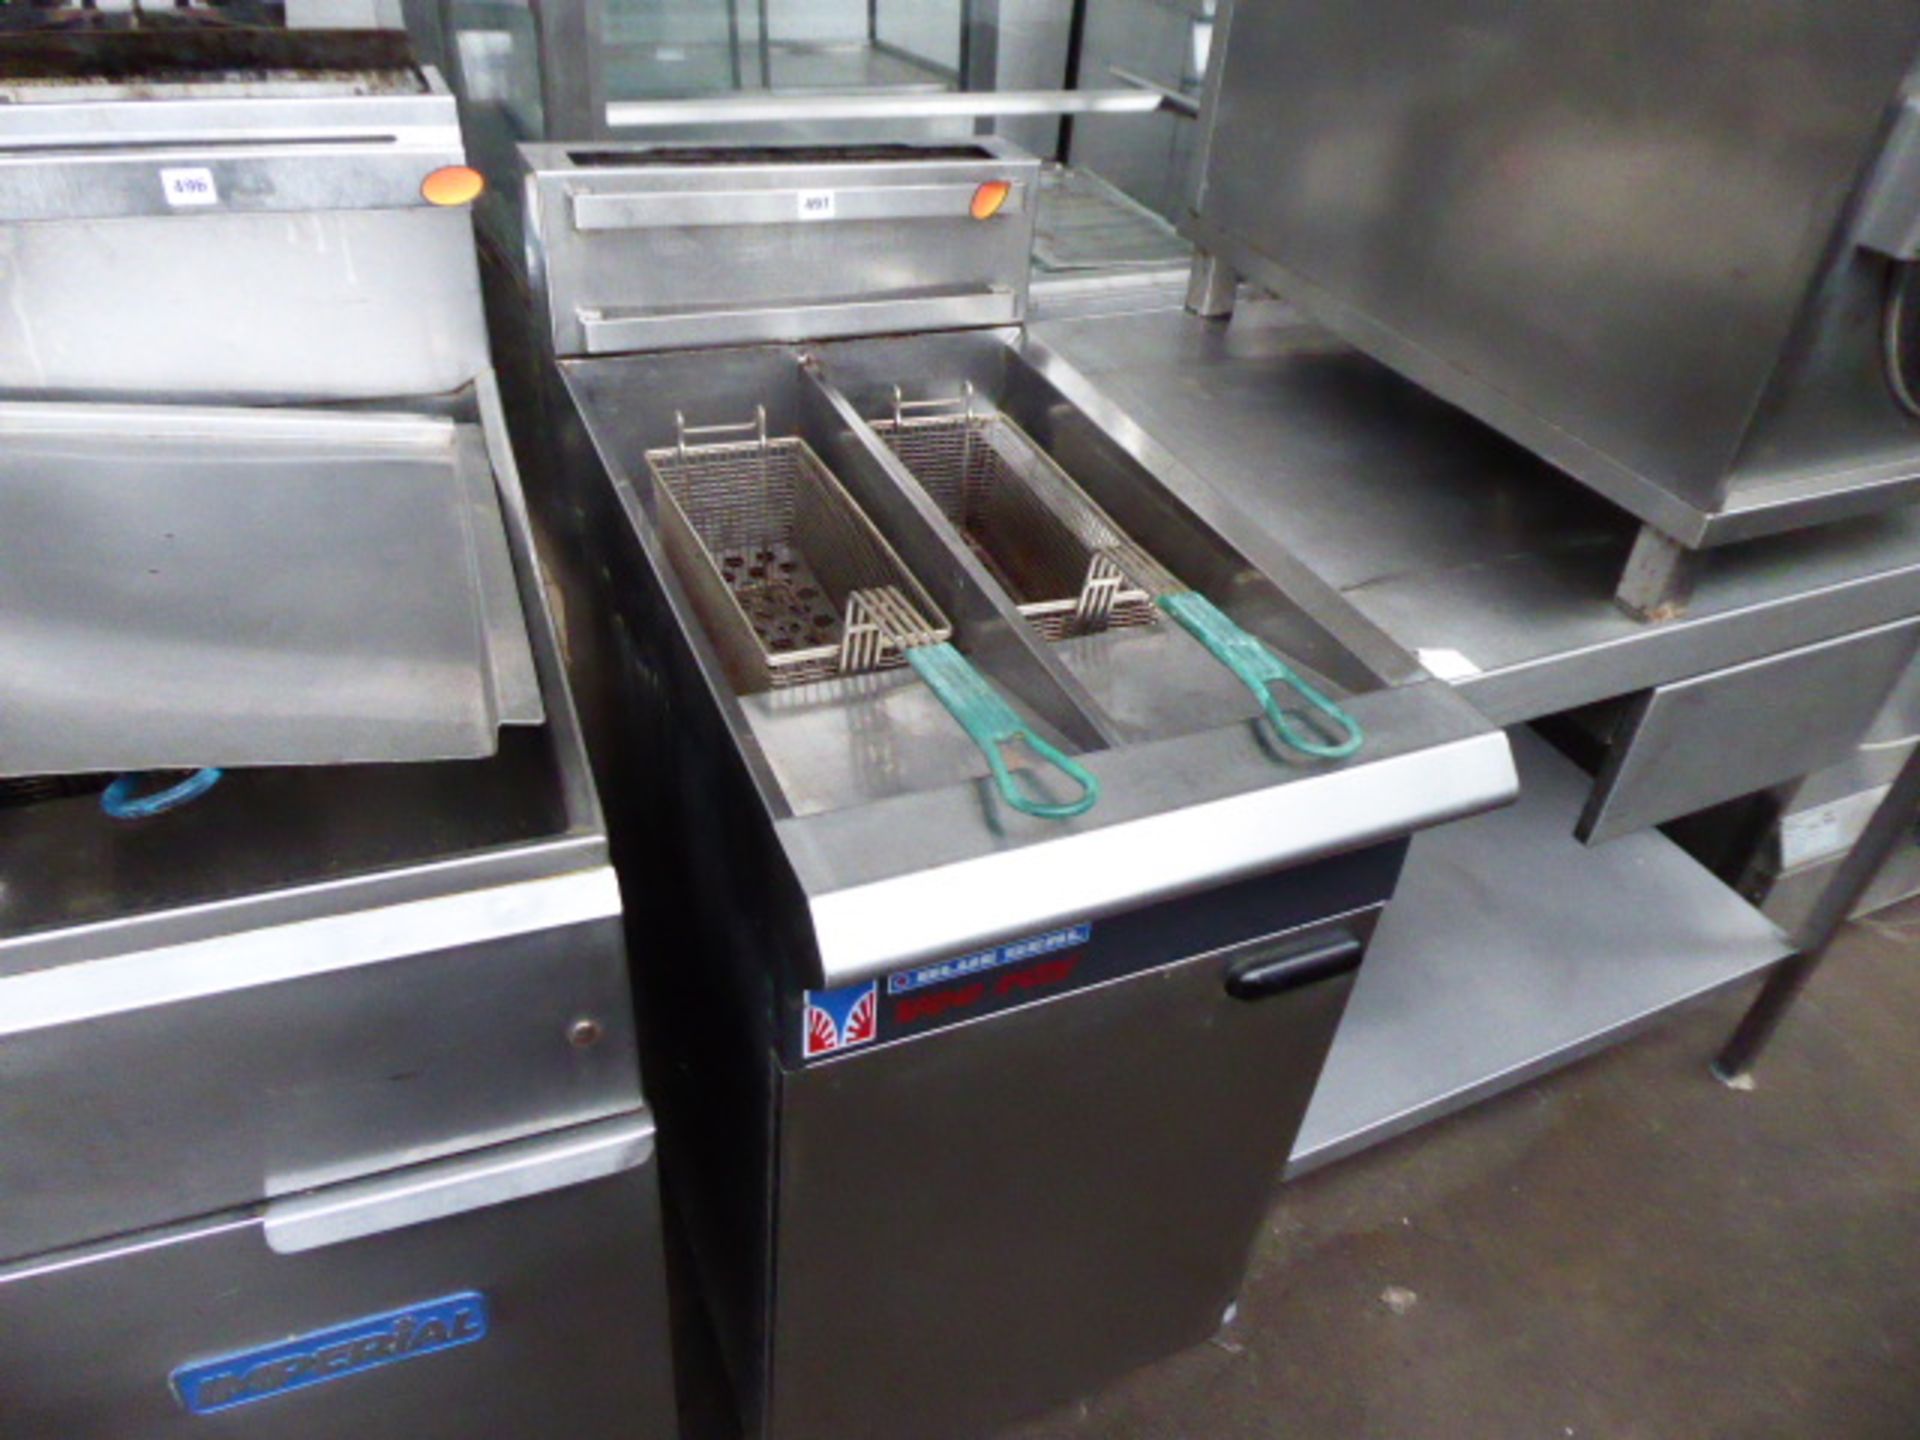 45cm gas Blue Seal Vee Ray twin tank fryer with 2 baskets